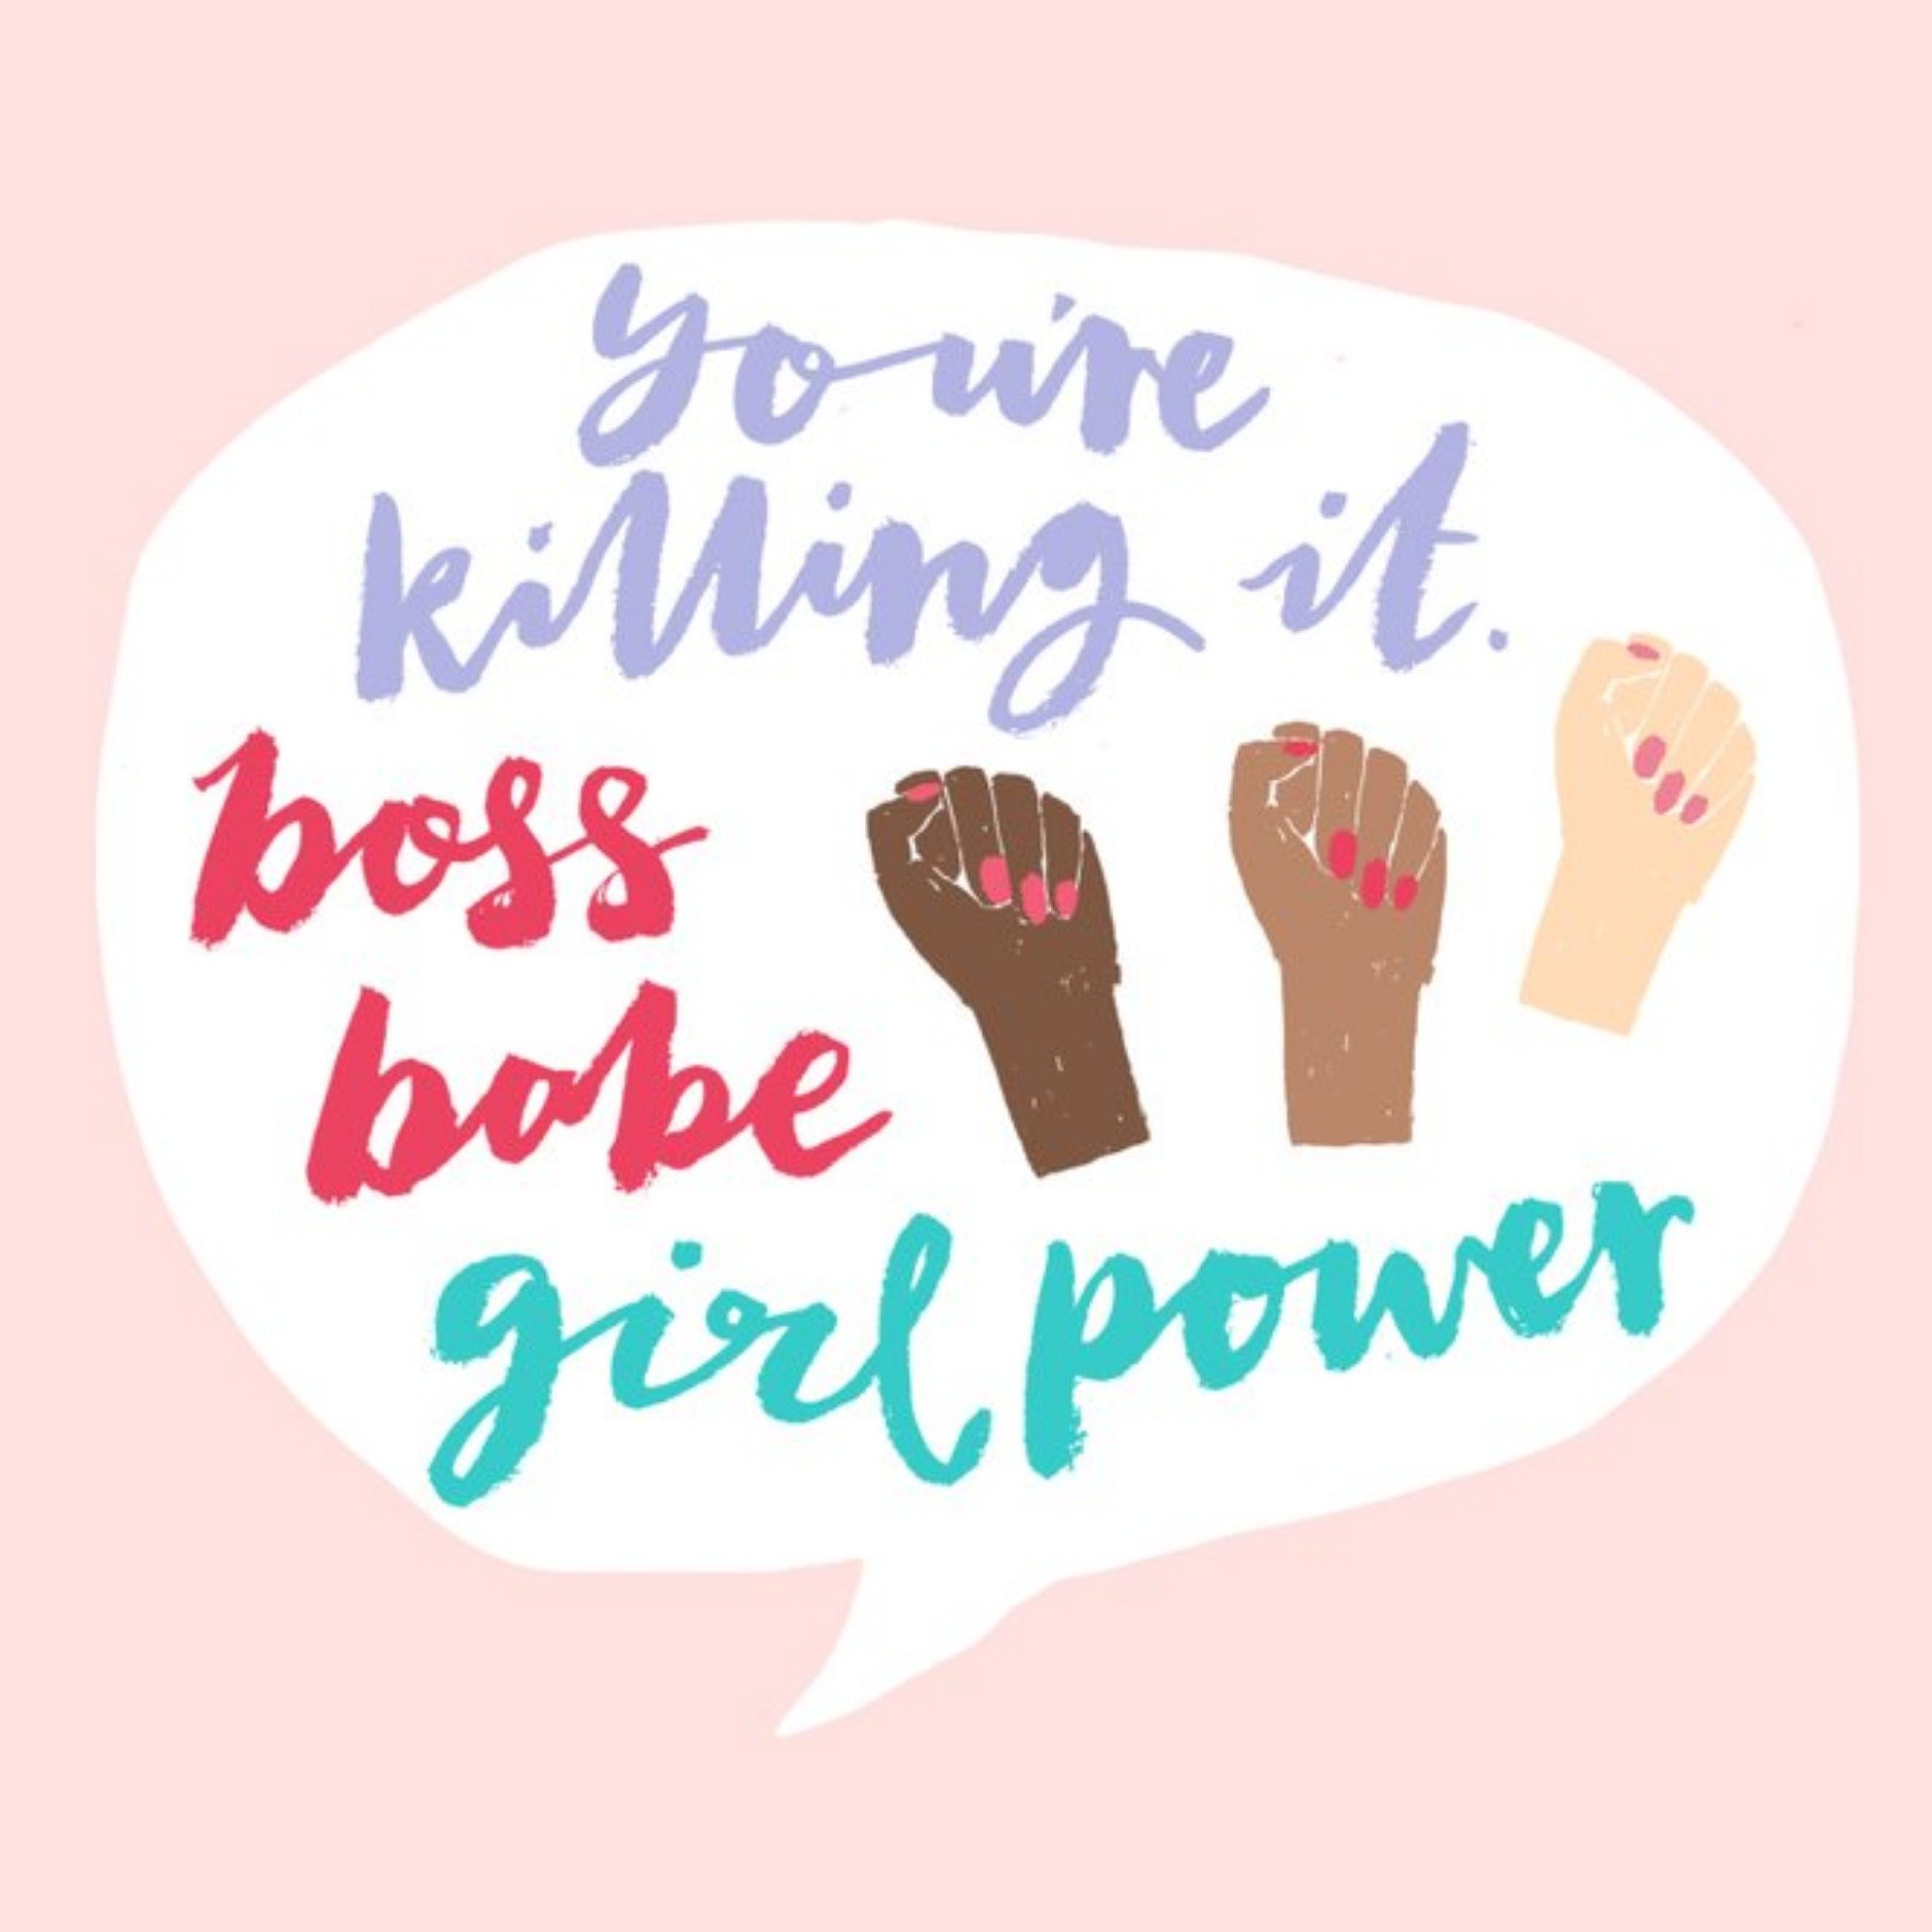 Moonpig Boss Babe Girl Power Just A Note Card For International Women's Day, Square